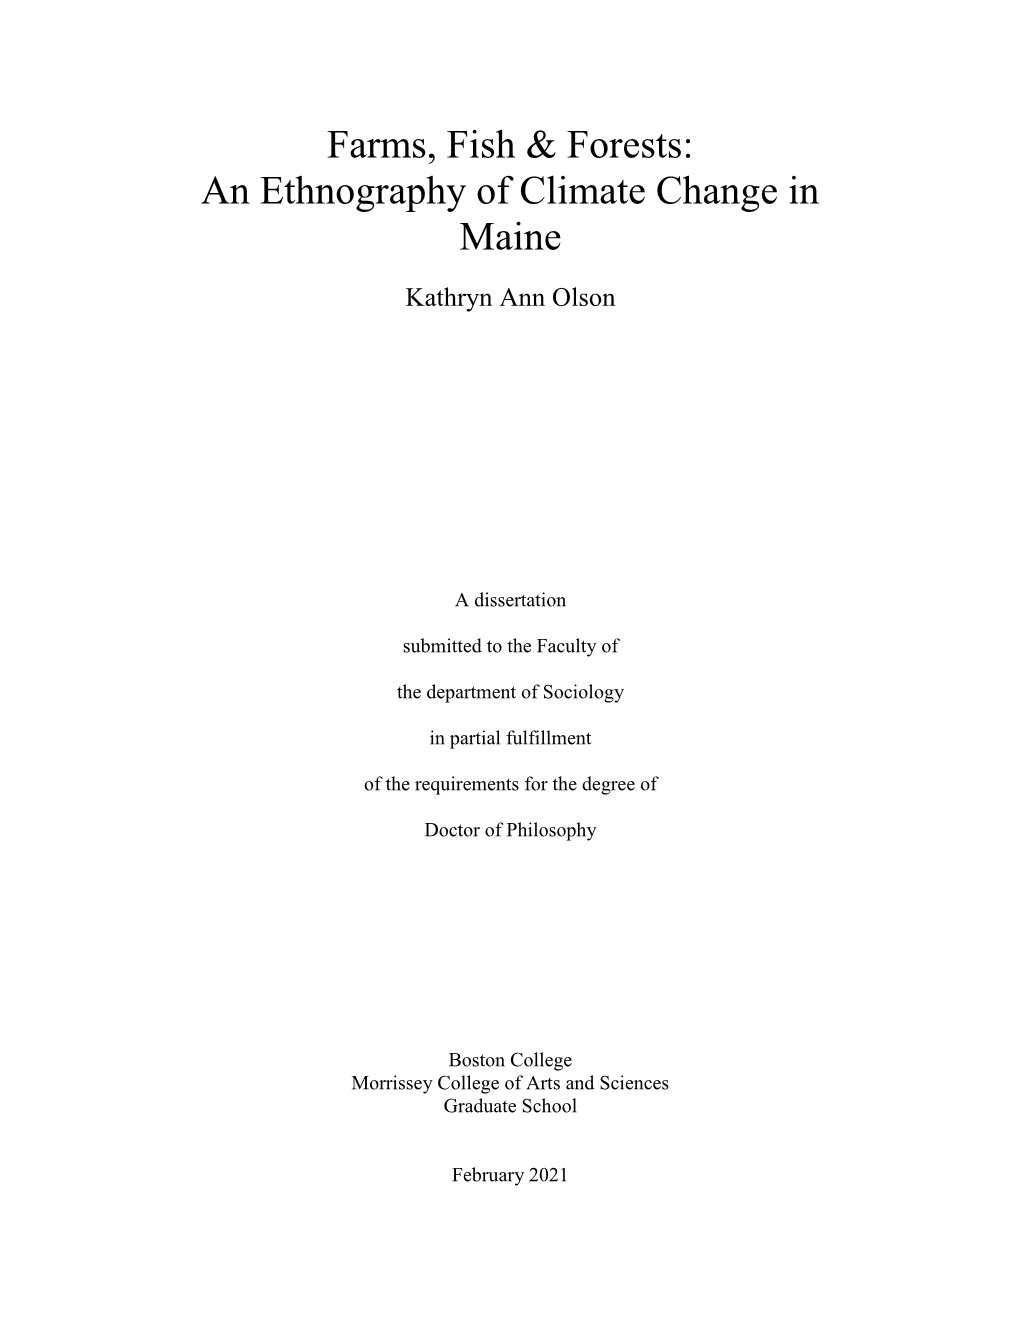 An Ethnography of Climate Change in Maine